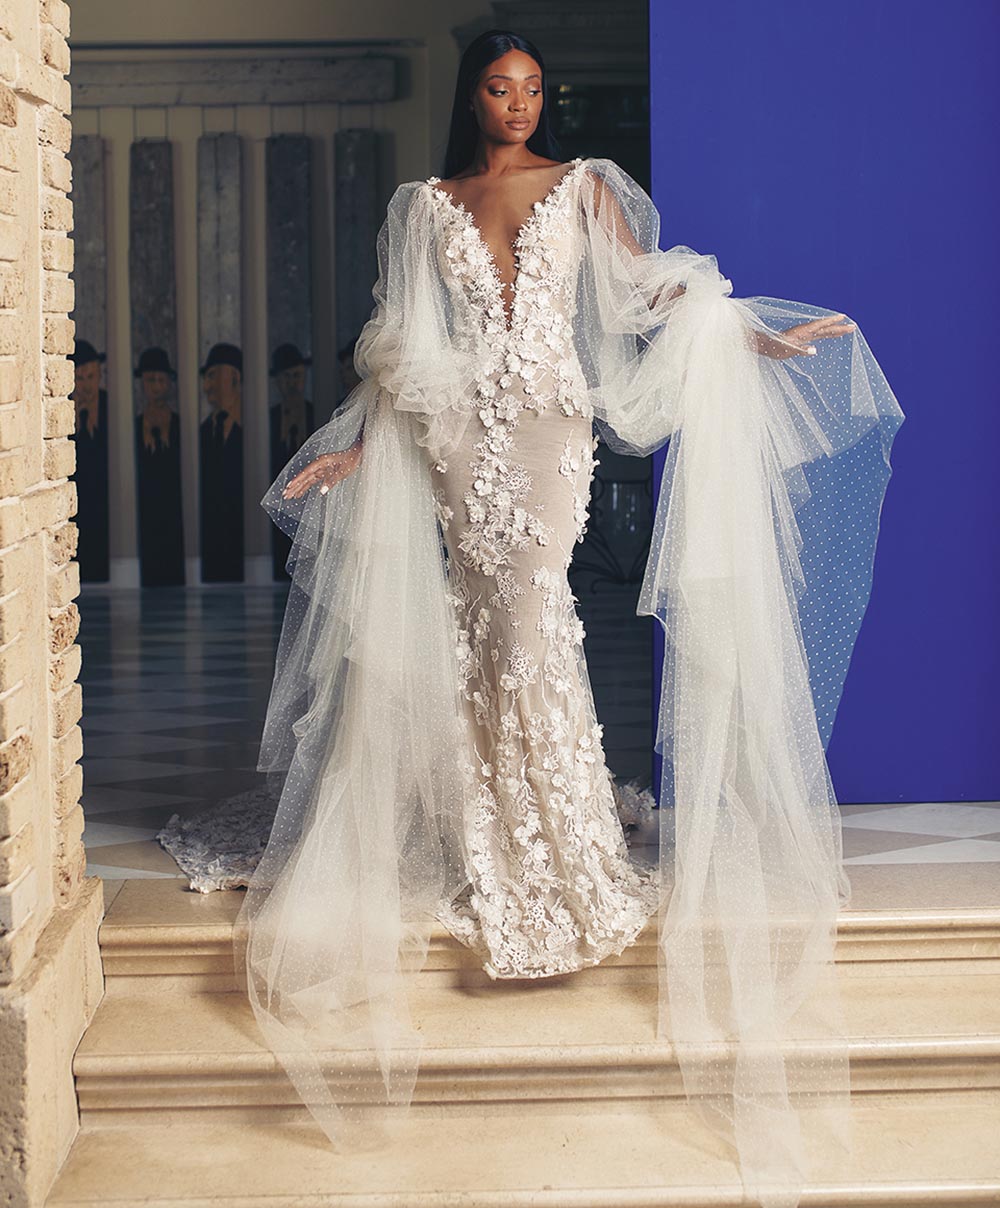 https://fashionweekonline.com/wp-content/uploads/2021/10/Get-Ready-For-Drama-Galia-Lahav-Introduces-The-AW-22-Collections-Featured.jpg